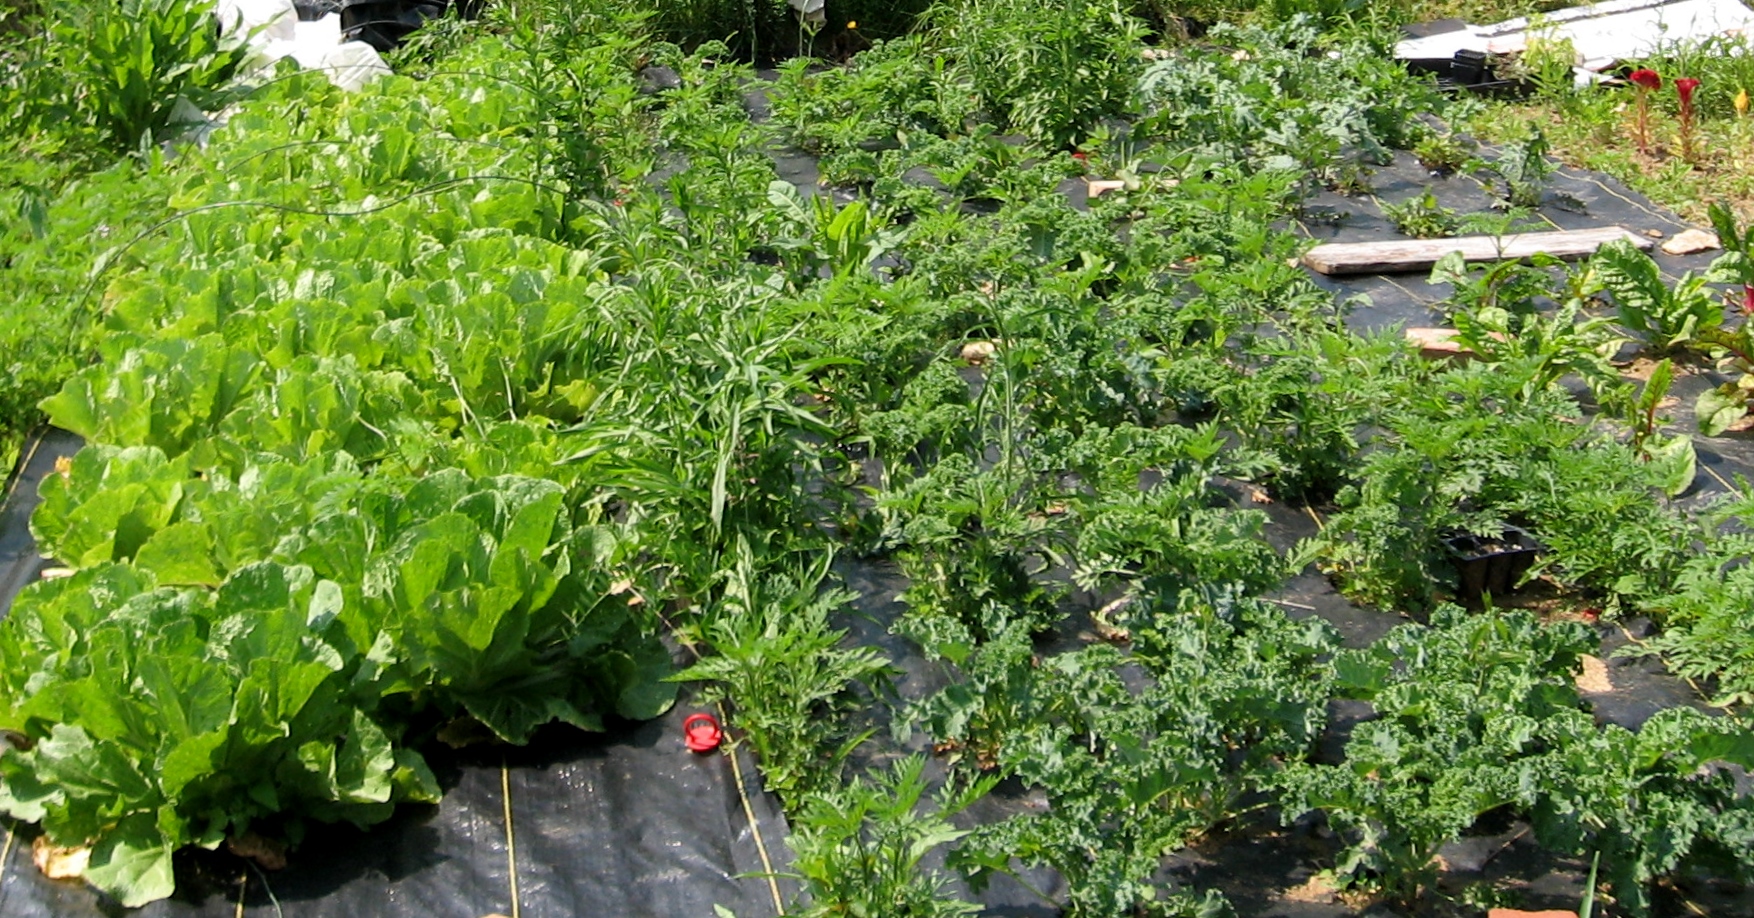 Organic gardening classes will help teach you to grow your own food.